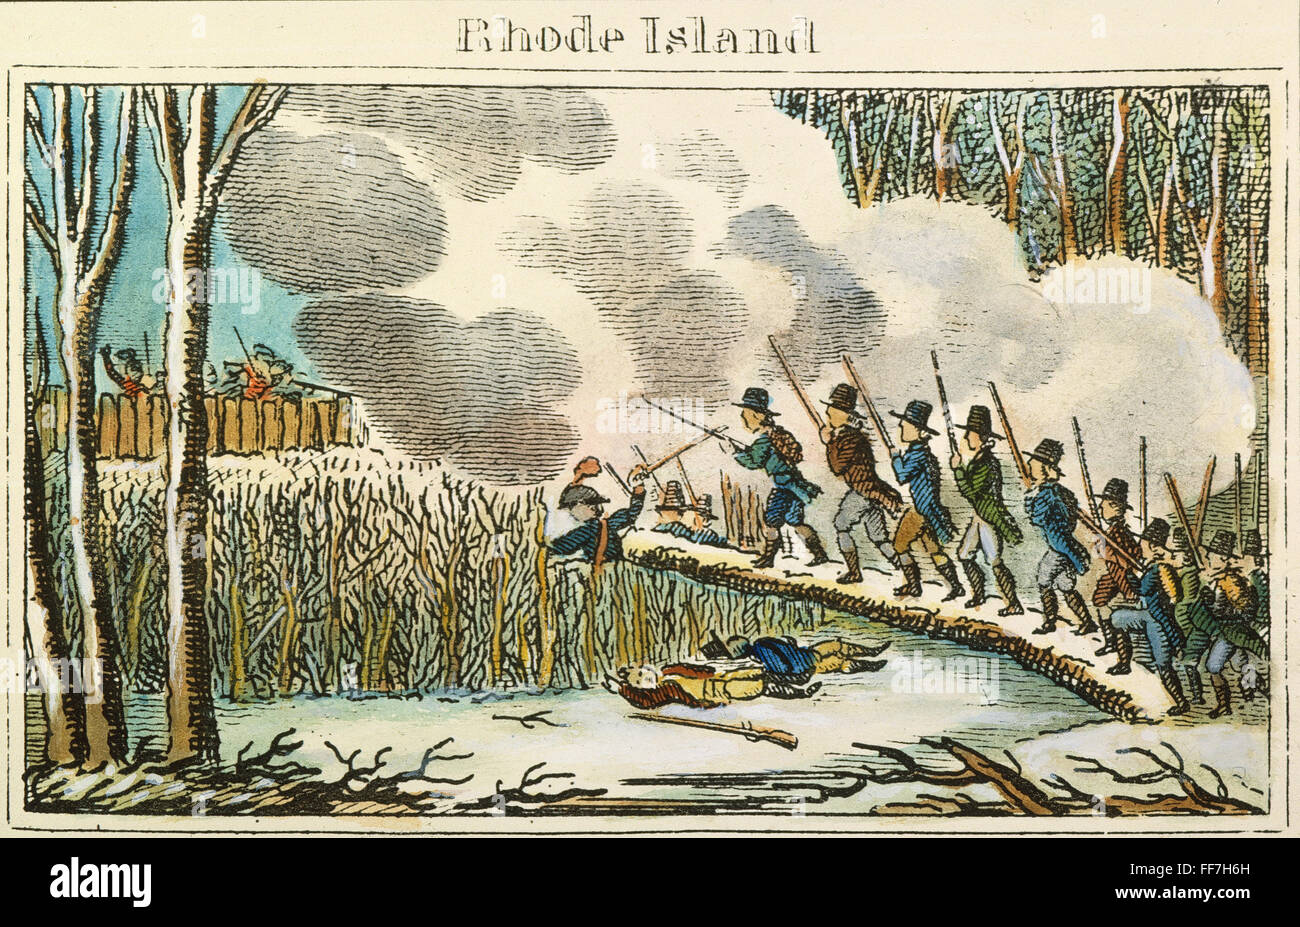 GREAT SWAMP FIGHT, 1675. /nThe Great Swamp Fight near South Kingston, Rhode Island, on 19 December 1675 during King Philip's War. Color engraving, 1827. Stock Photo